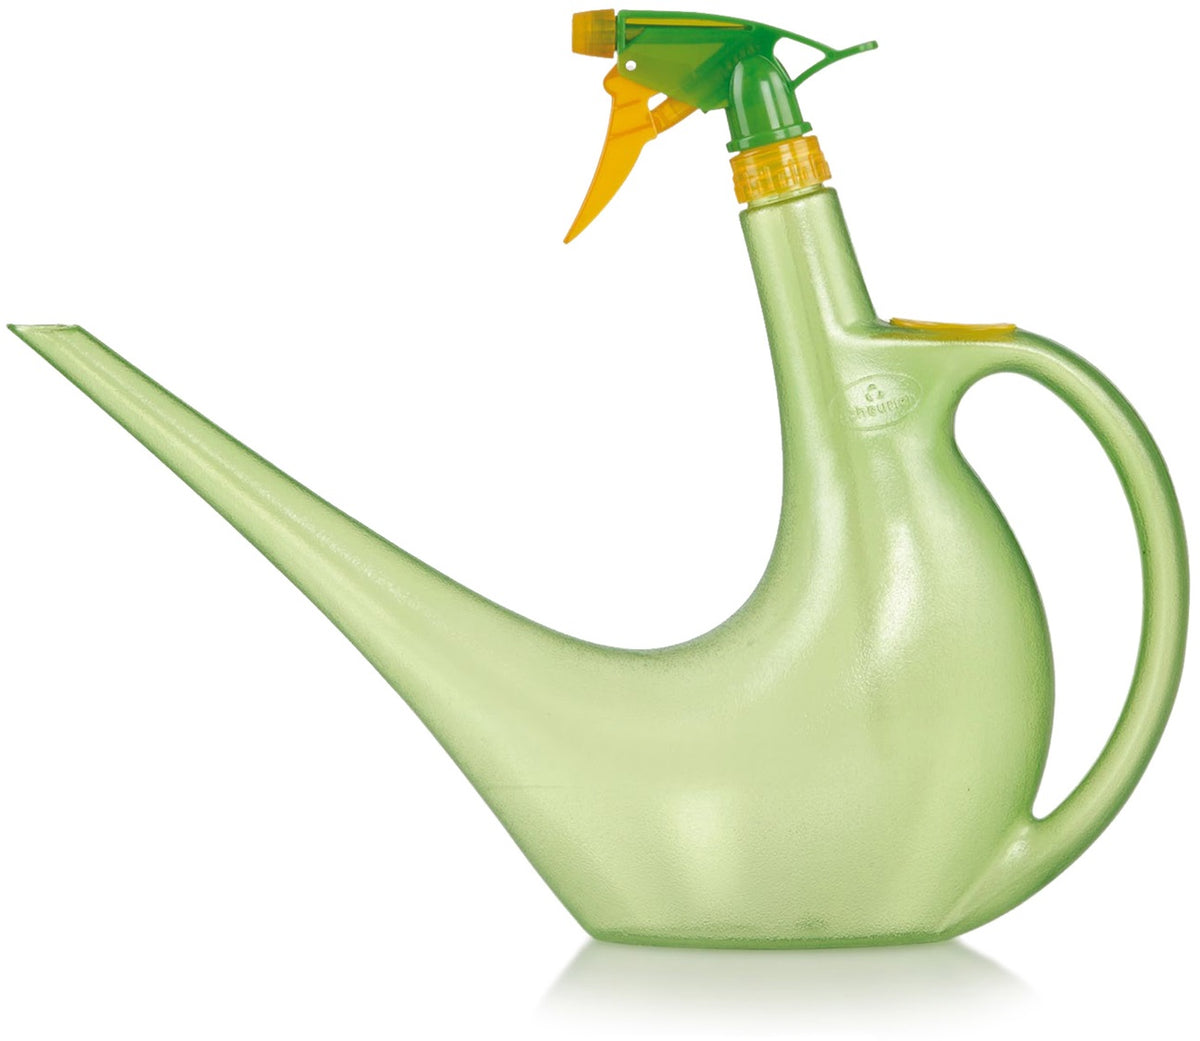 Buy sprayman watering can - Online store for lawn & plant care, hand sprayers in USA, on sale, low price, discount deals, coupon code